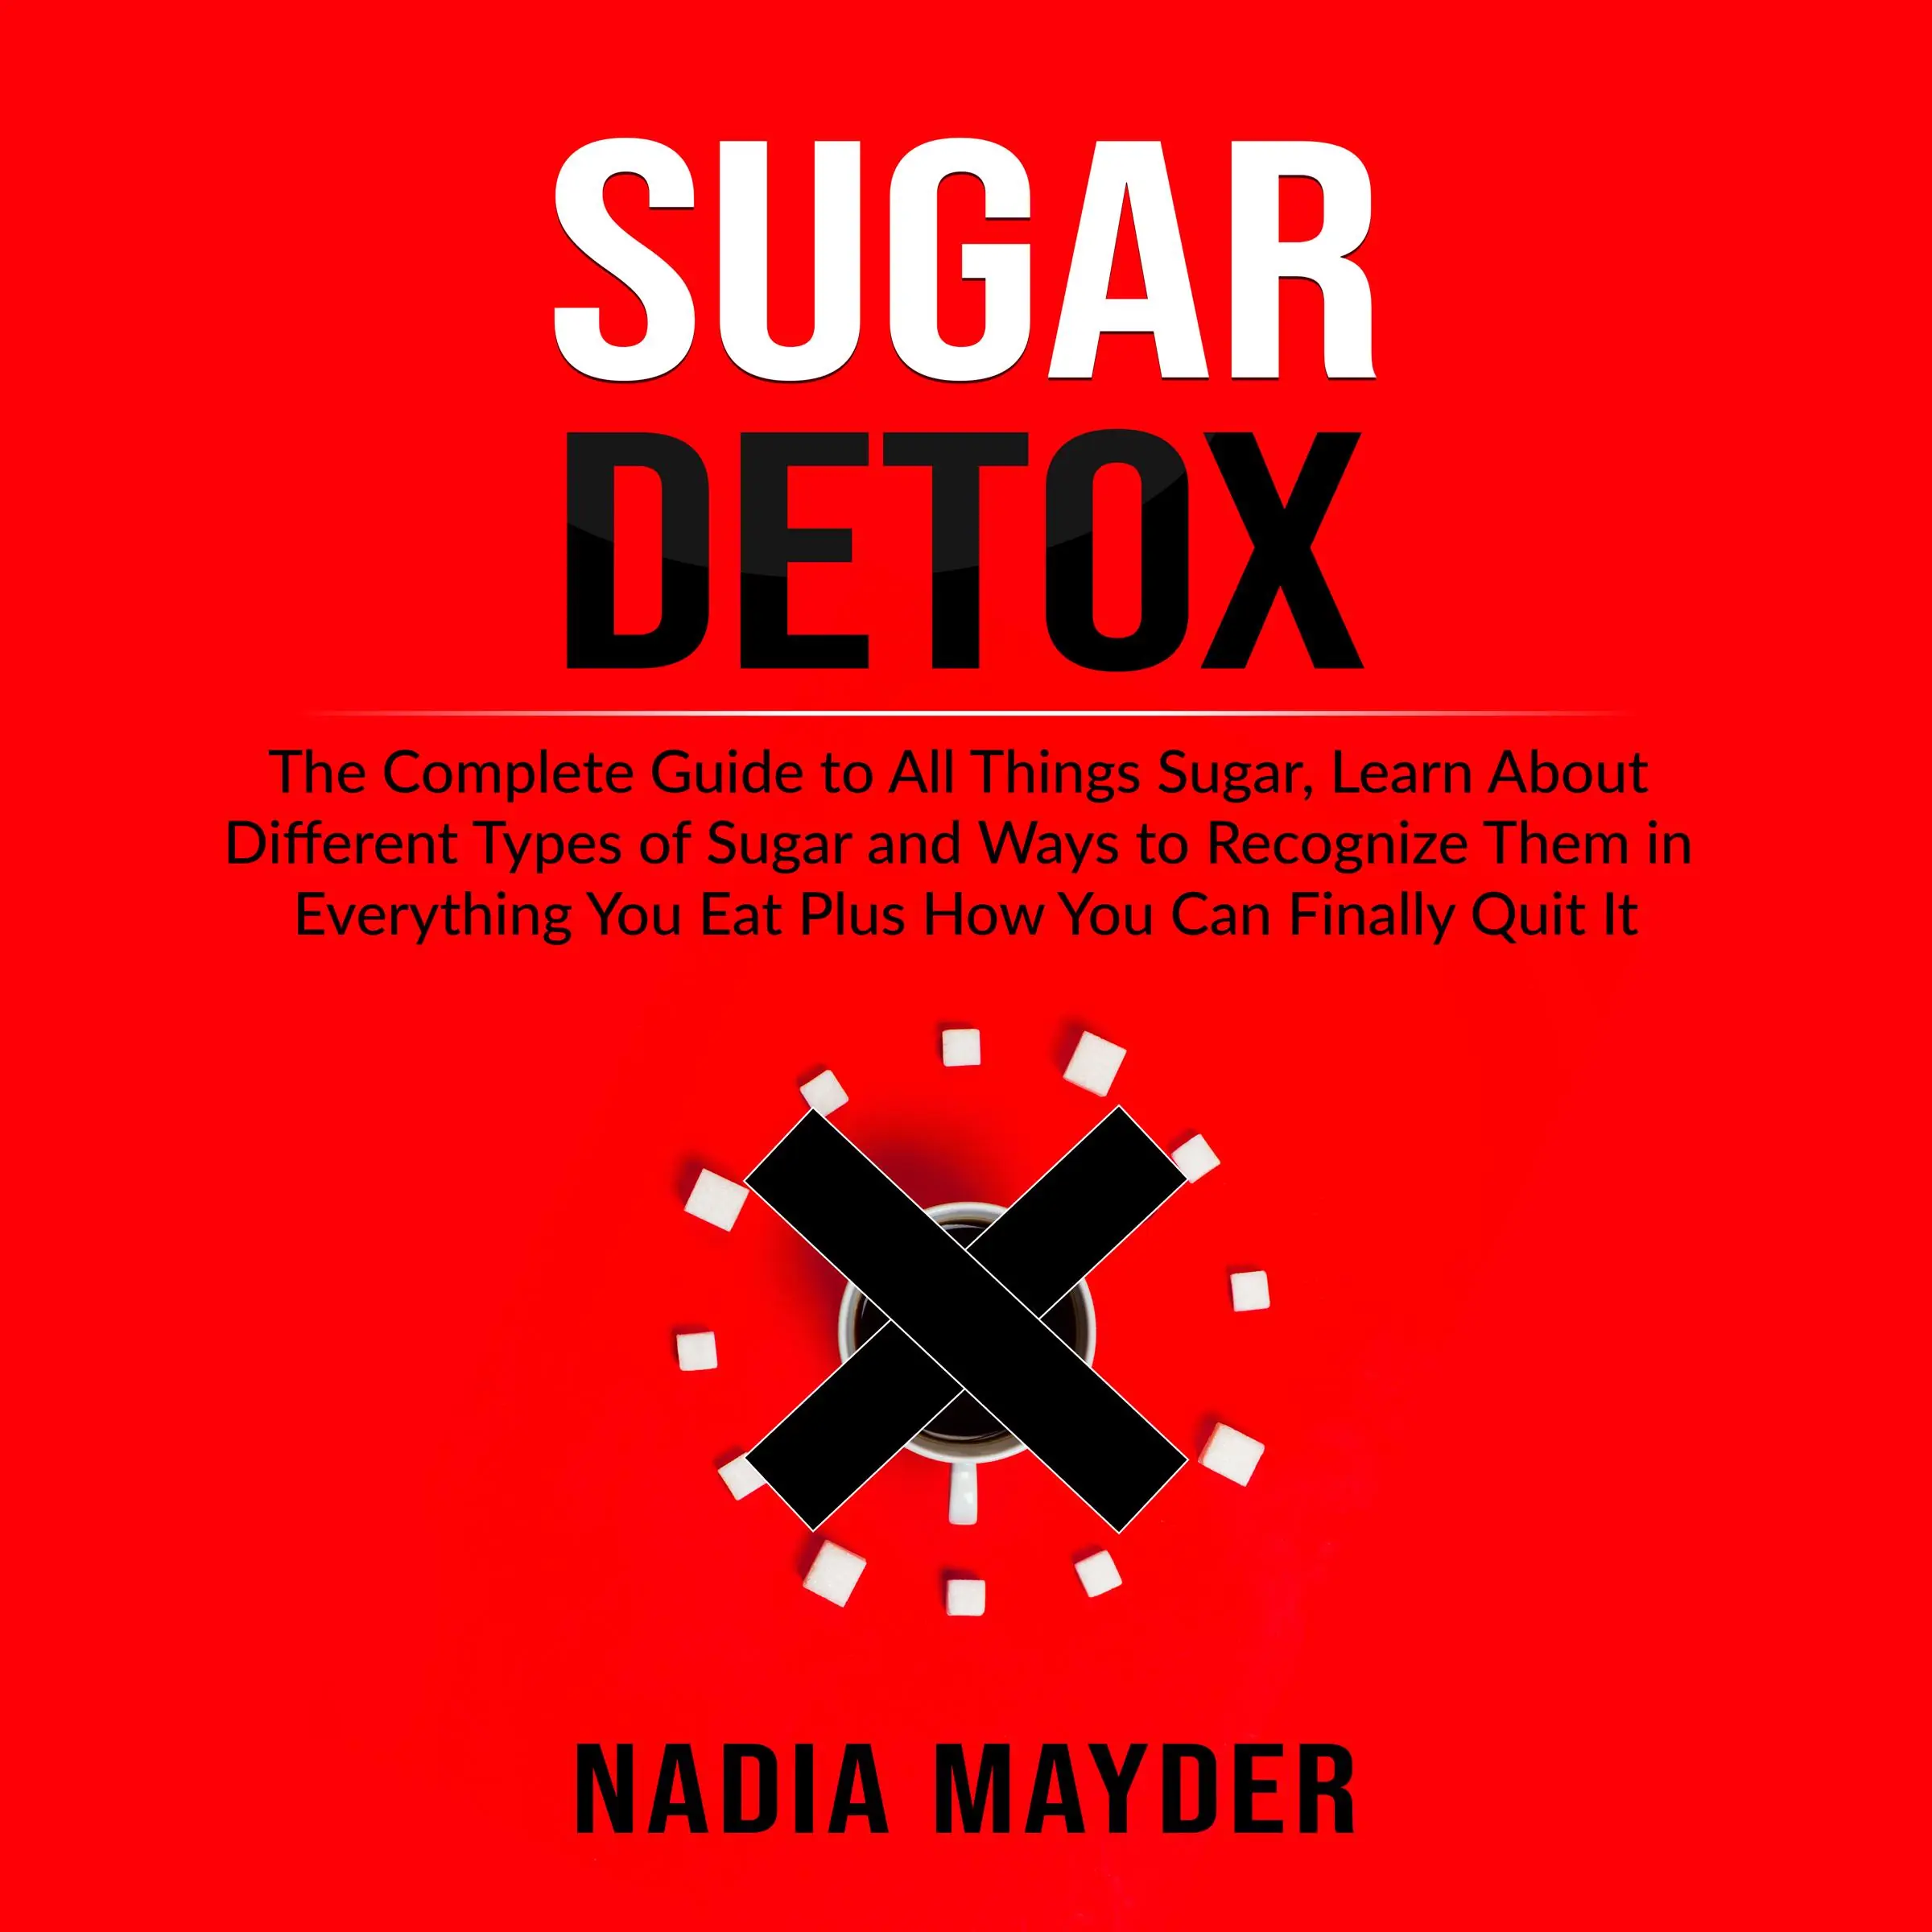 Sugar Detox: The Complete Guide to All Things Sugar, Learn About Different Types of Sugar and Ways to Recognize Them in Everything You Eat Plus How You Can Finally Quit It by Nadia Mayder Audiobook